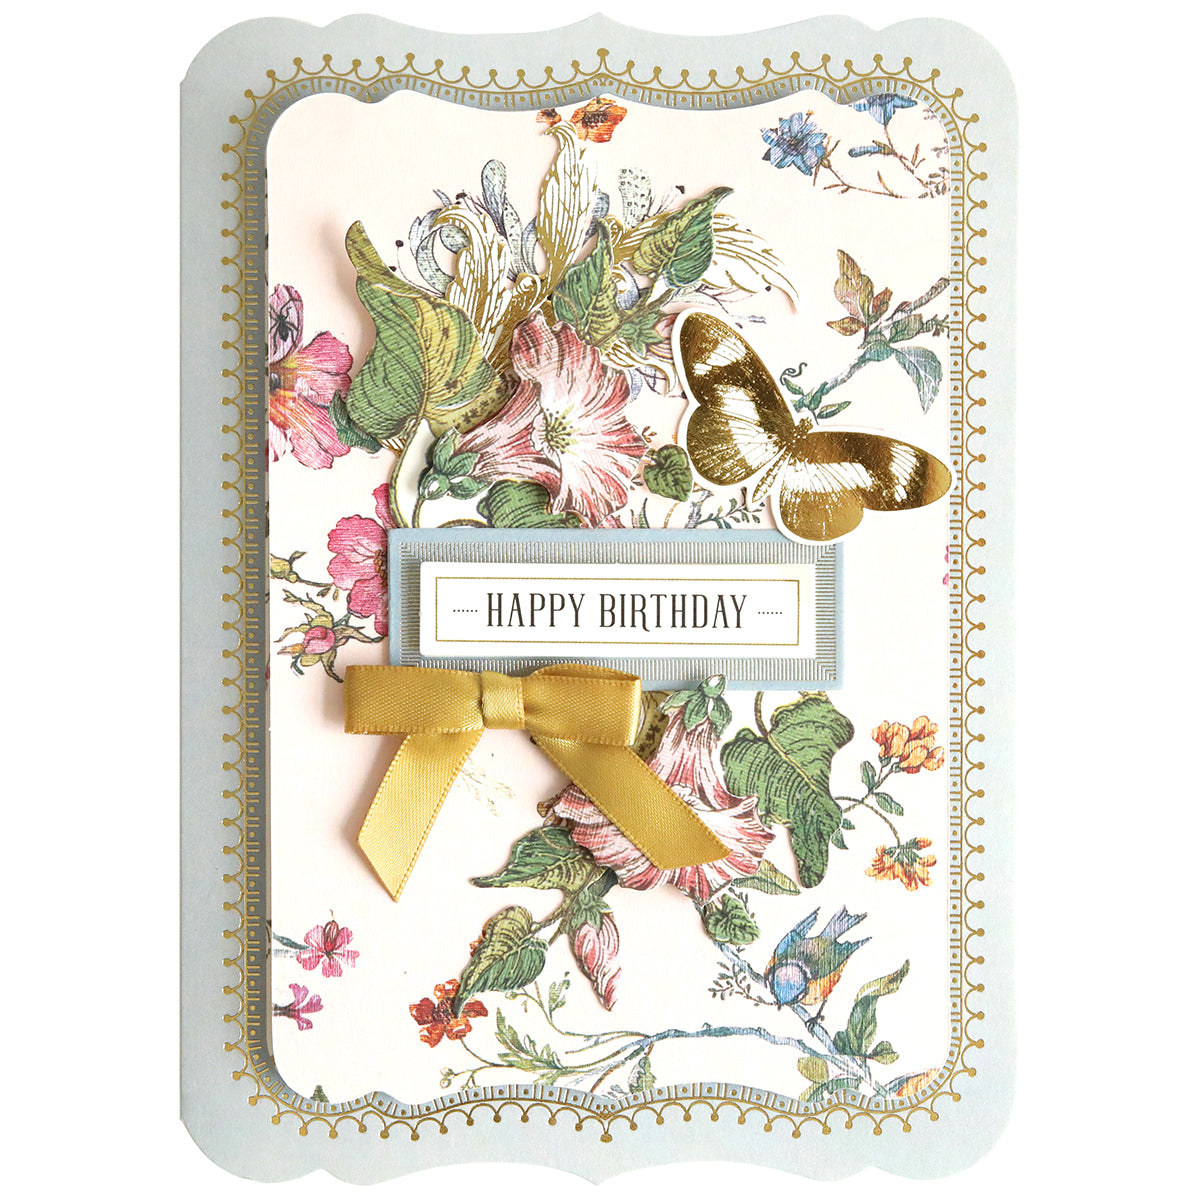 A decorative Simply Wildflower Meadow Card Making Kit with wildflower meadow patterns, a butterfly motif, and 3D embellishments.